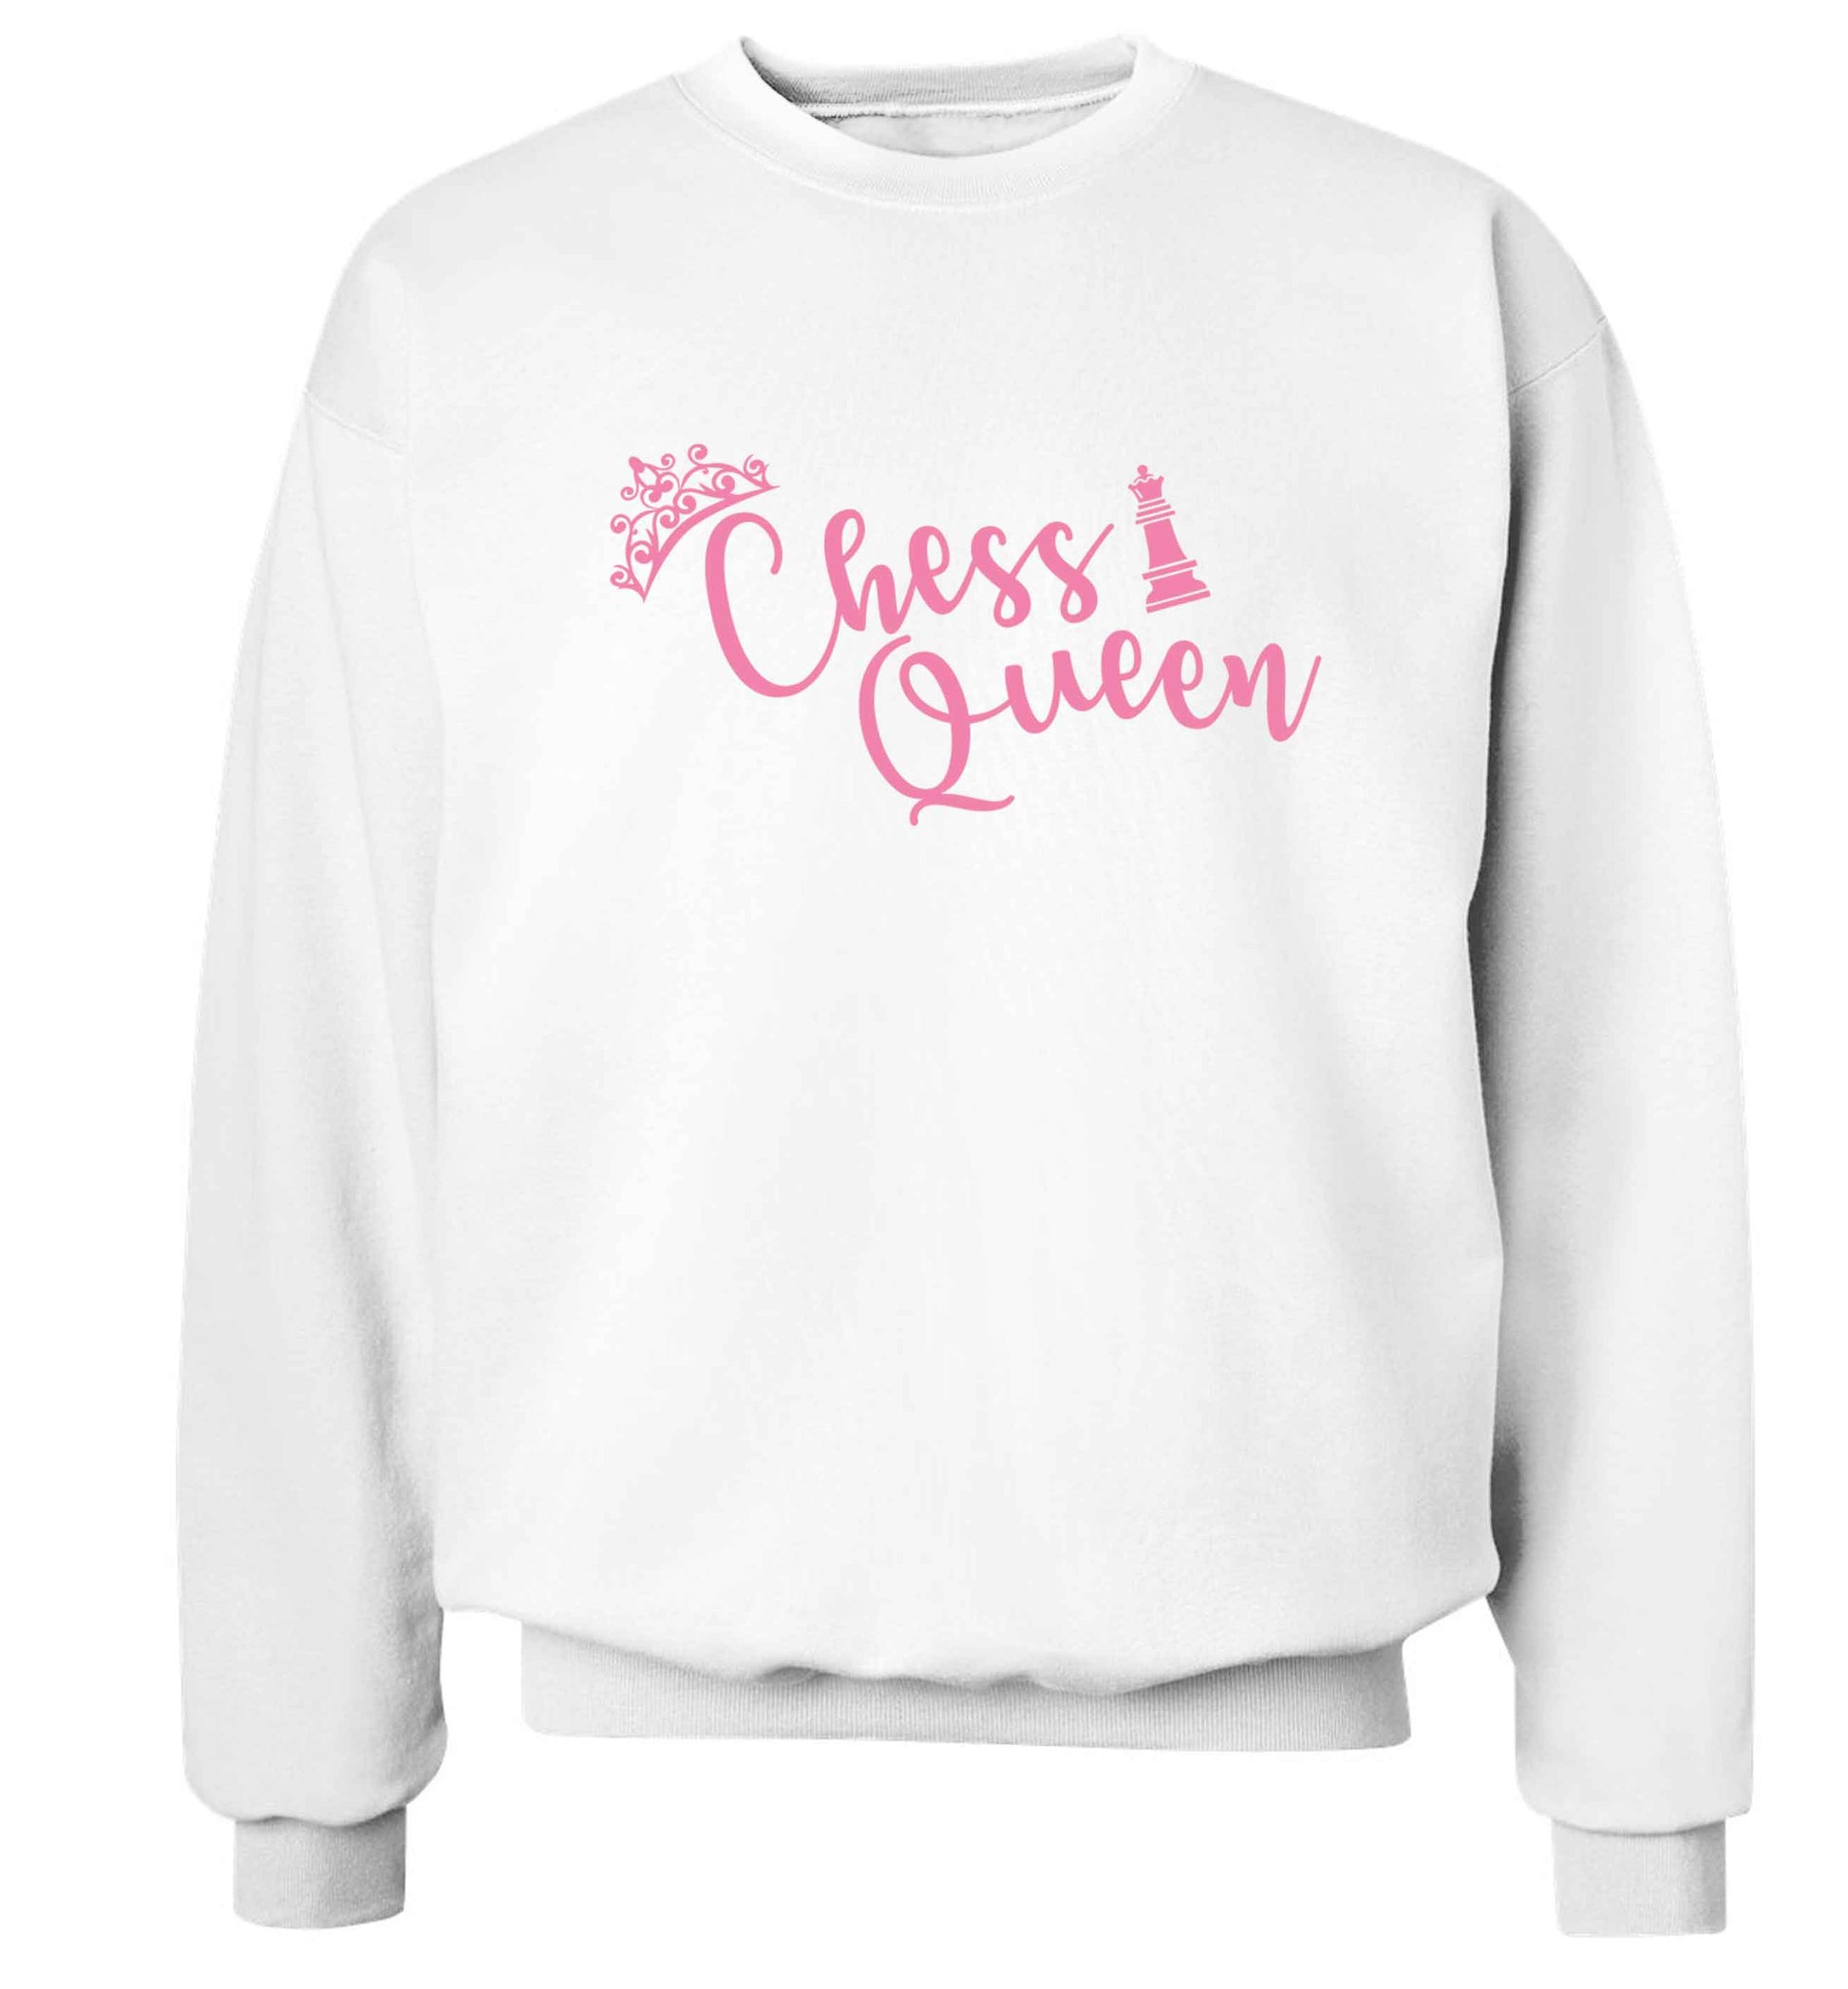 Pink chess queen  Adult's unisex white Sweater 2XL